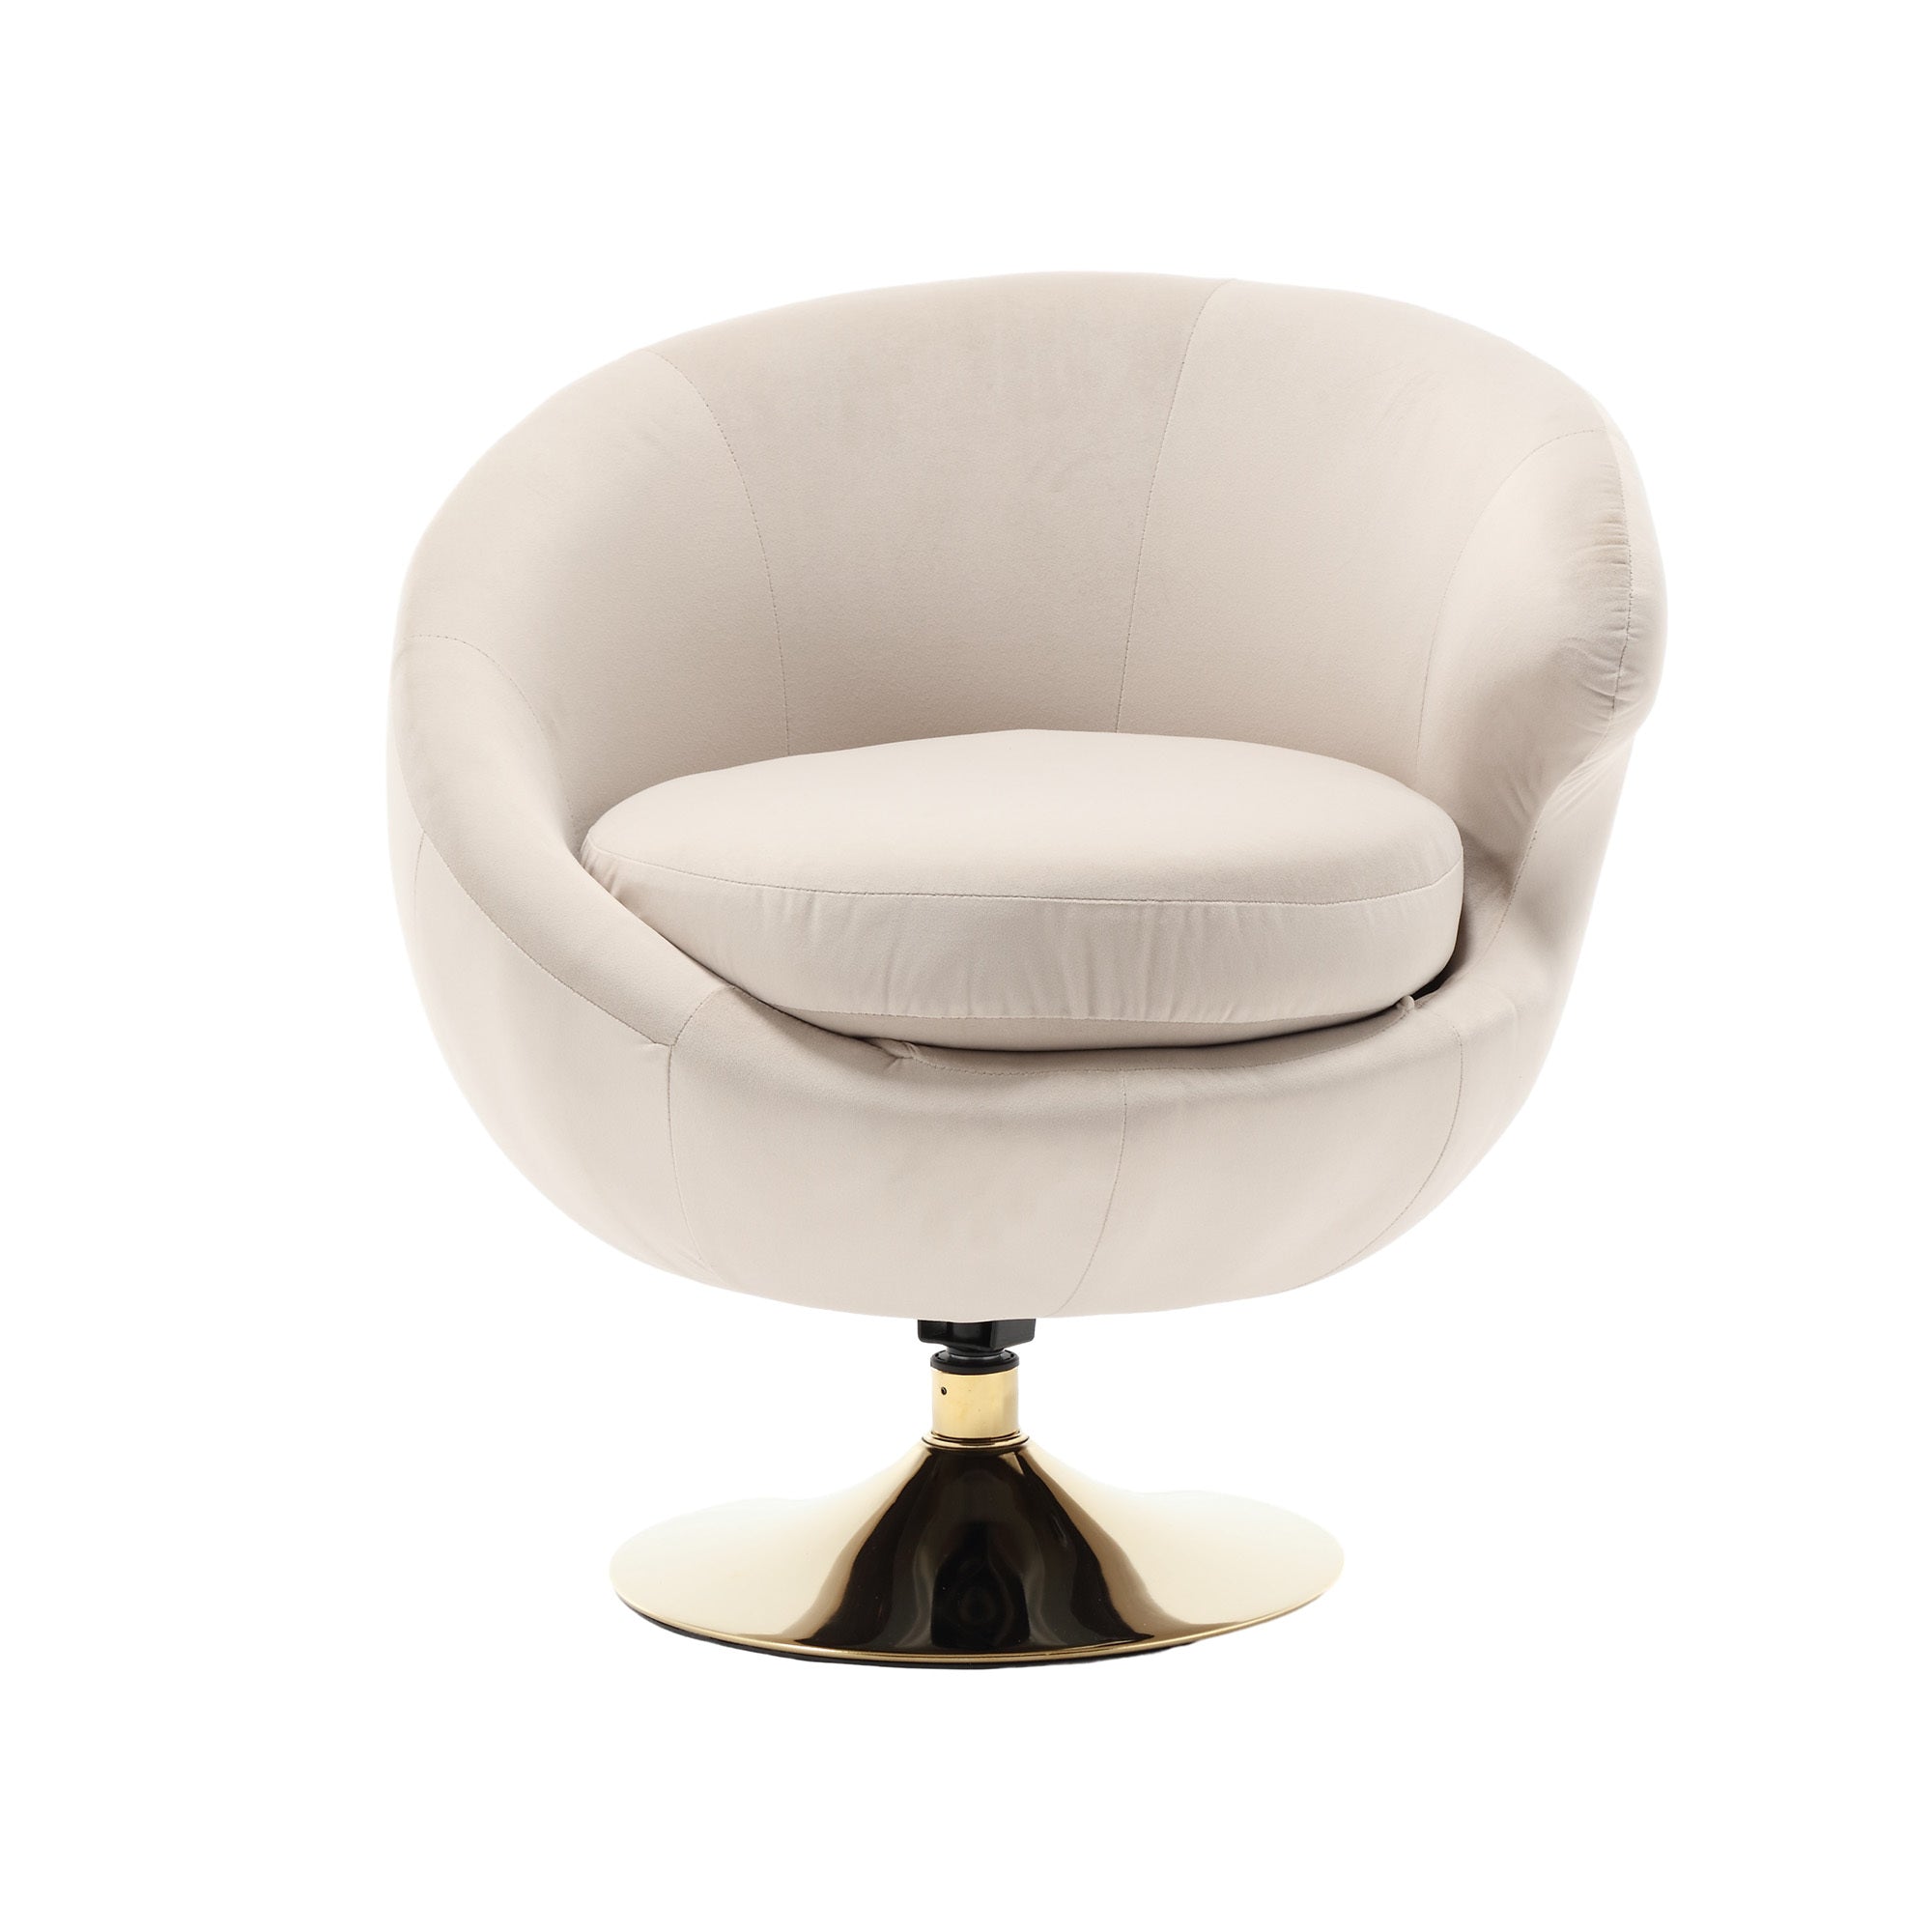 360 Degree Swivel Cuddle Barrel Accent Chairs, Round